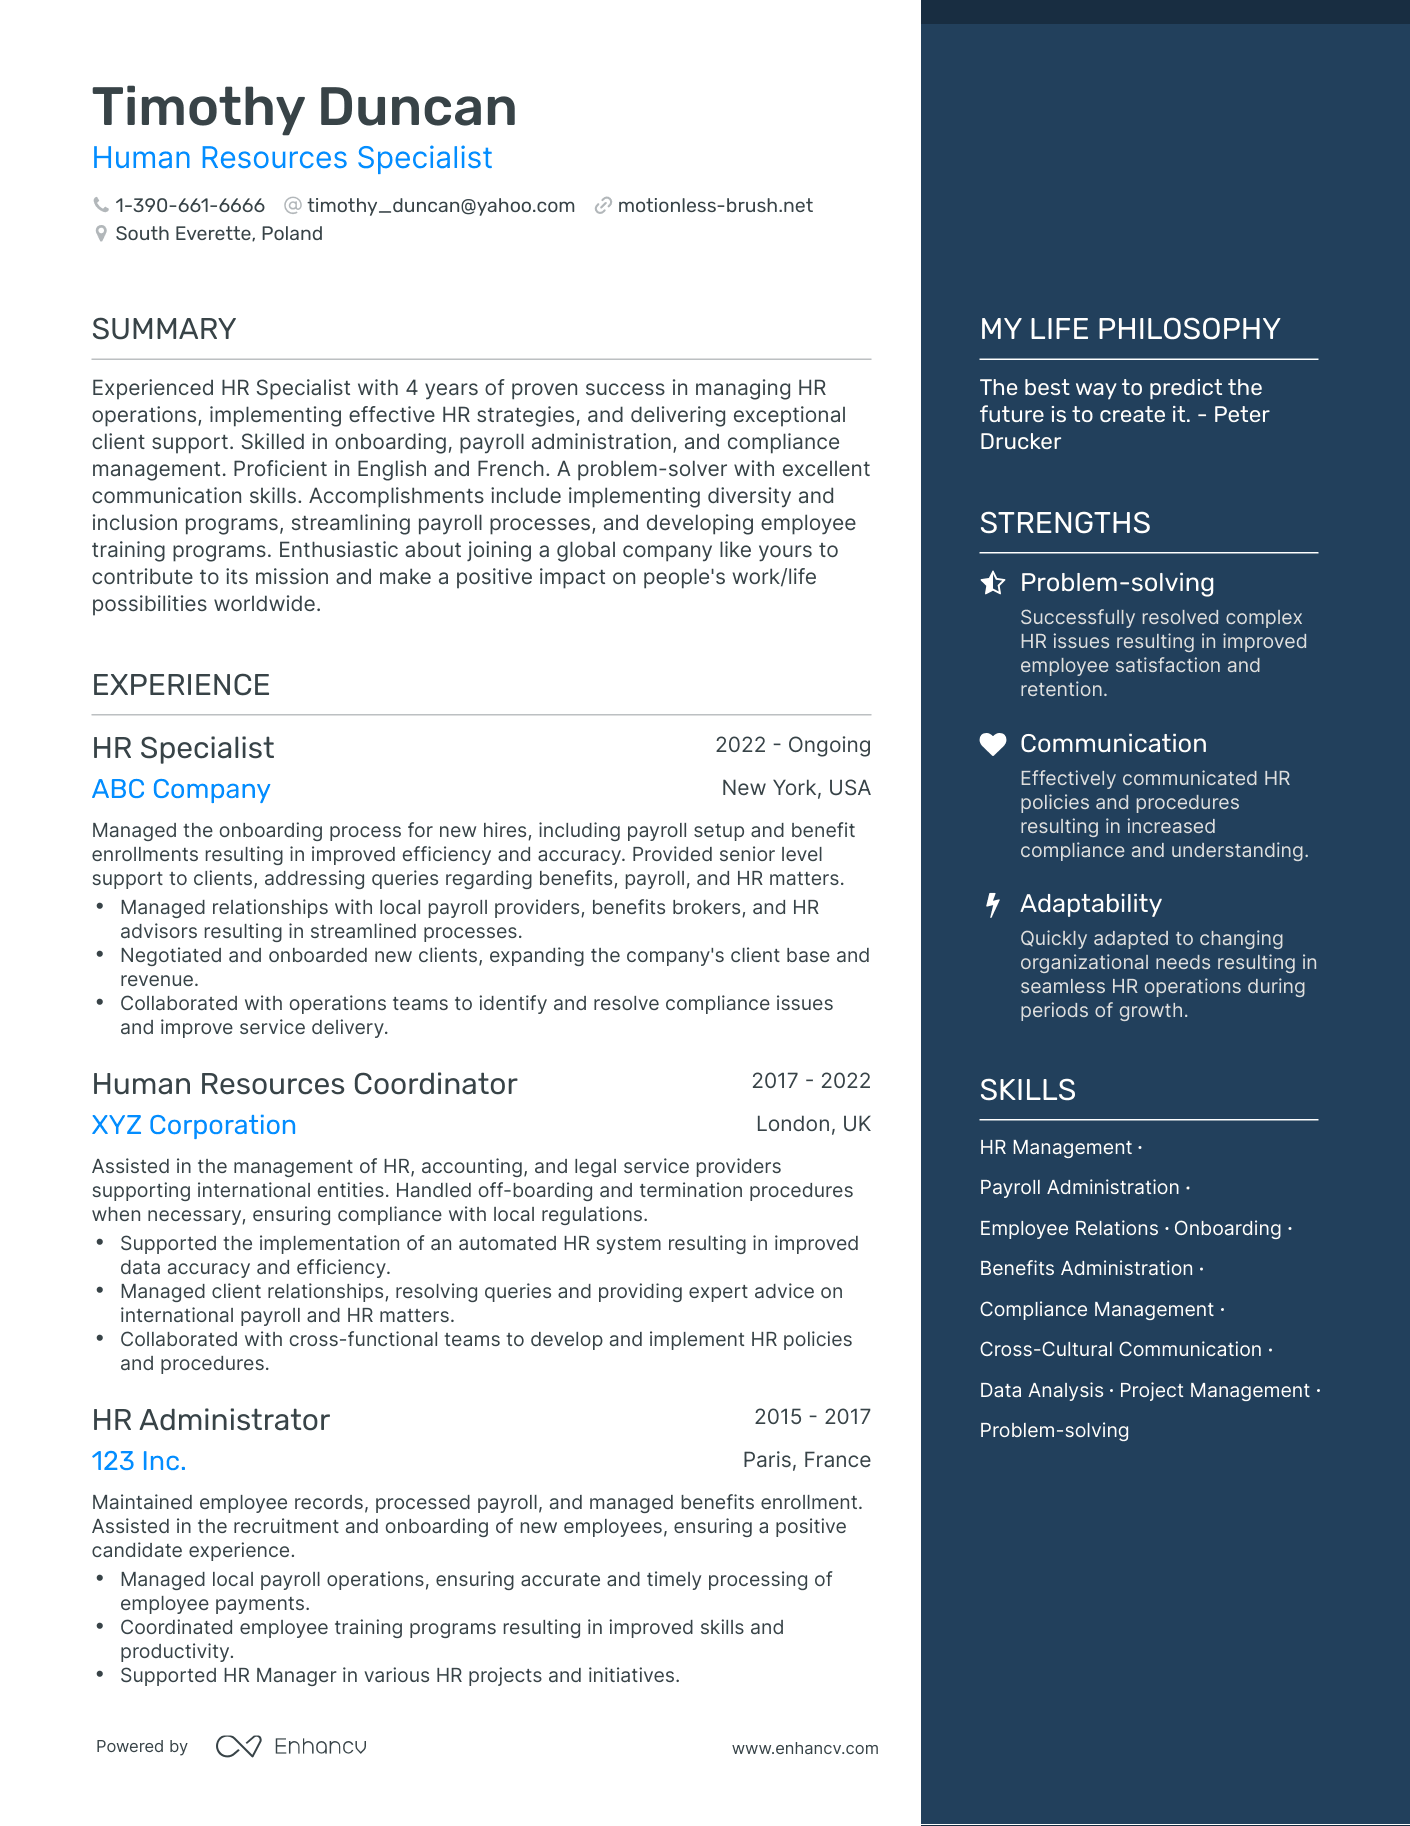 Human Resources Specialist resume example